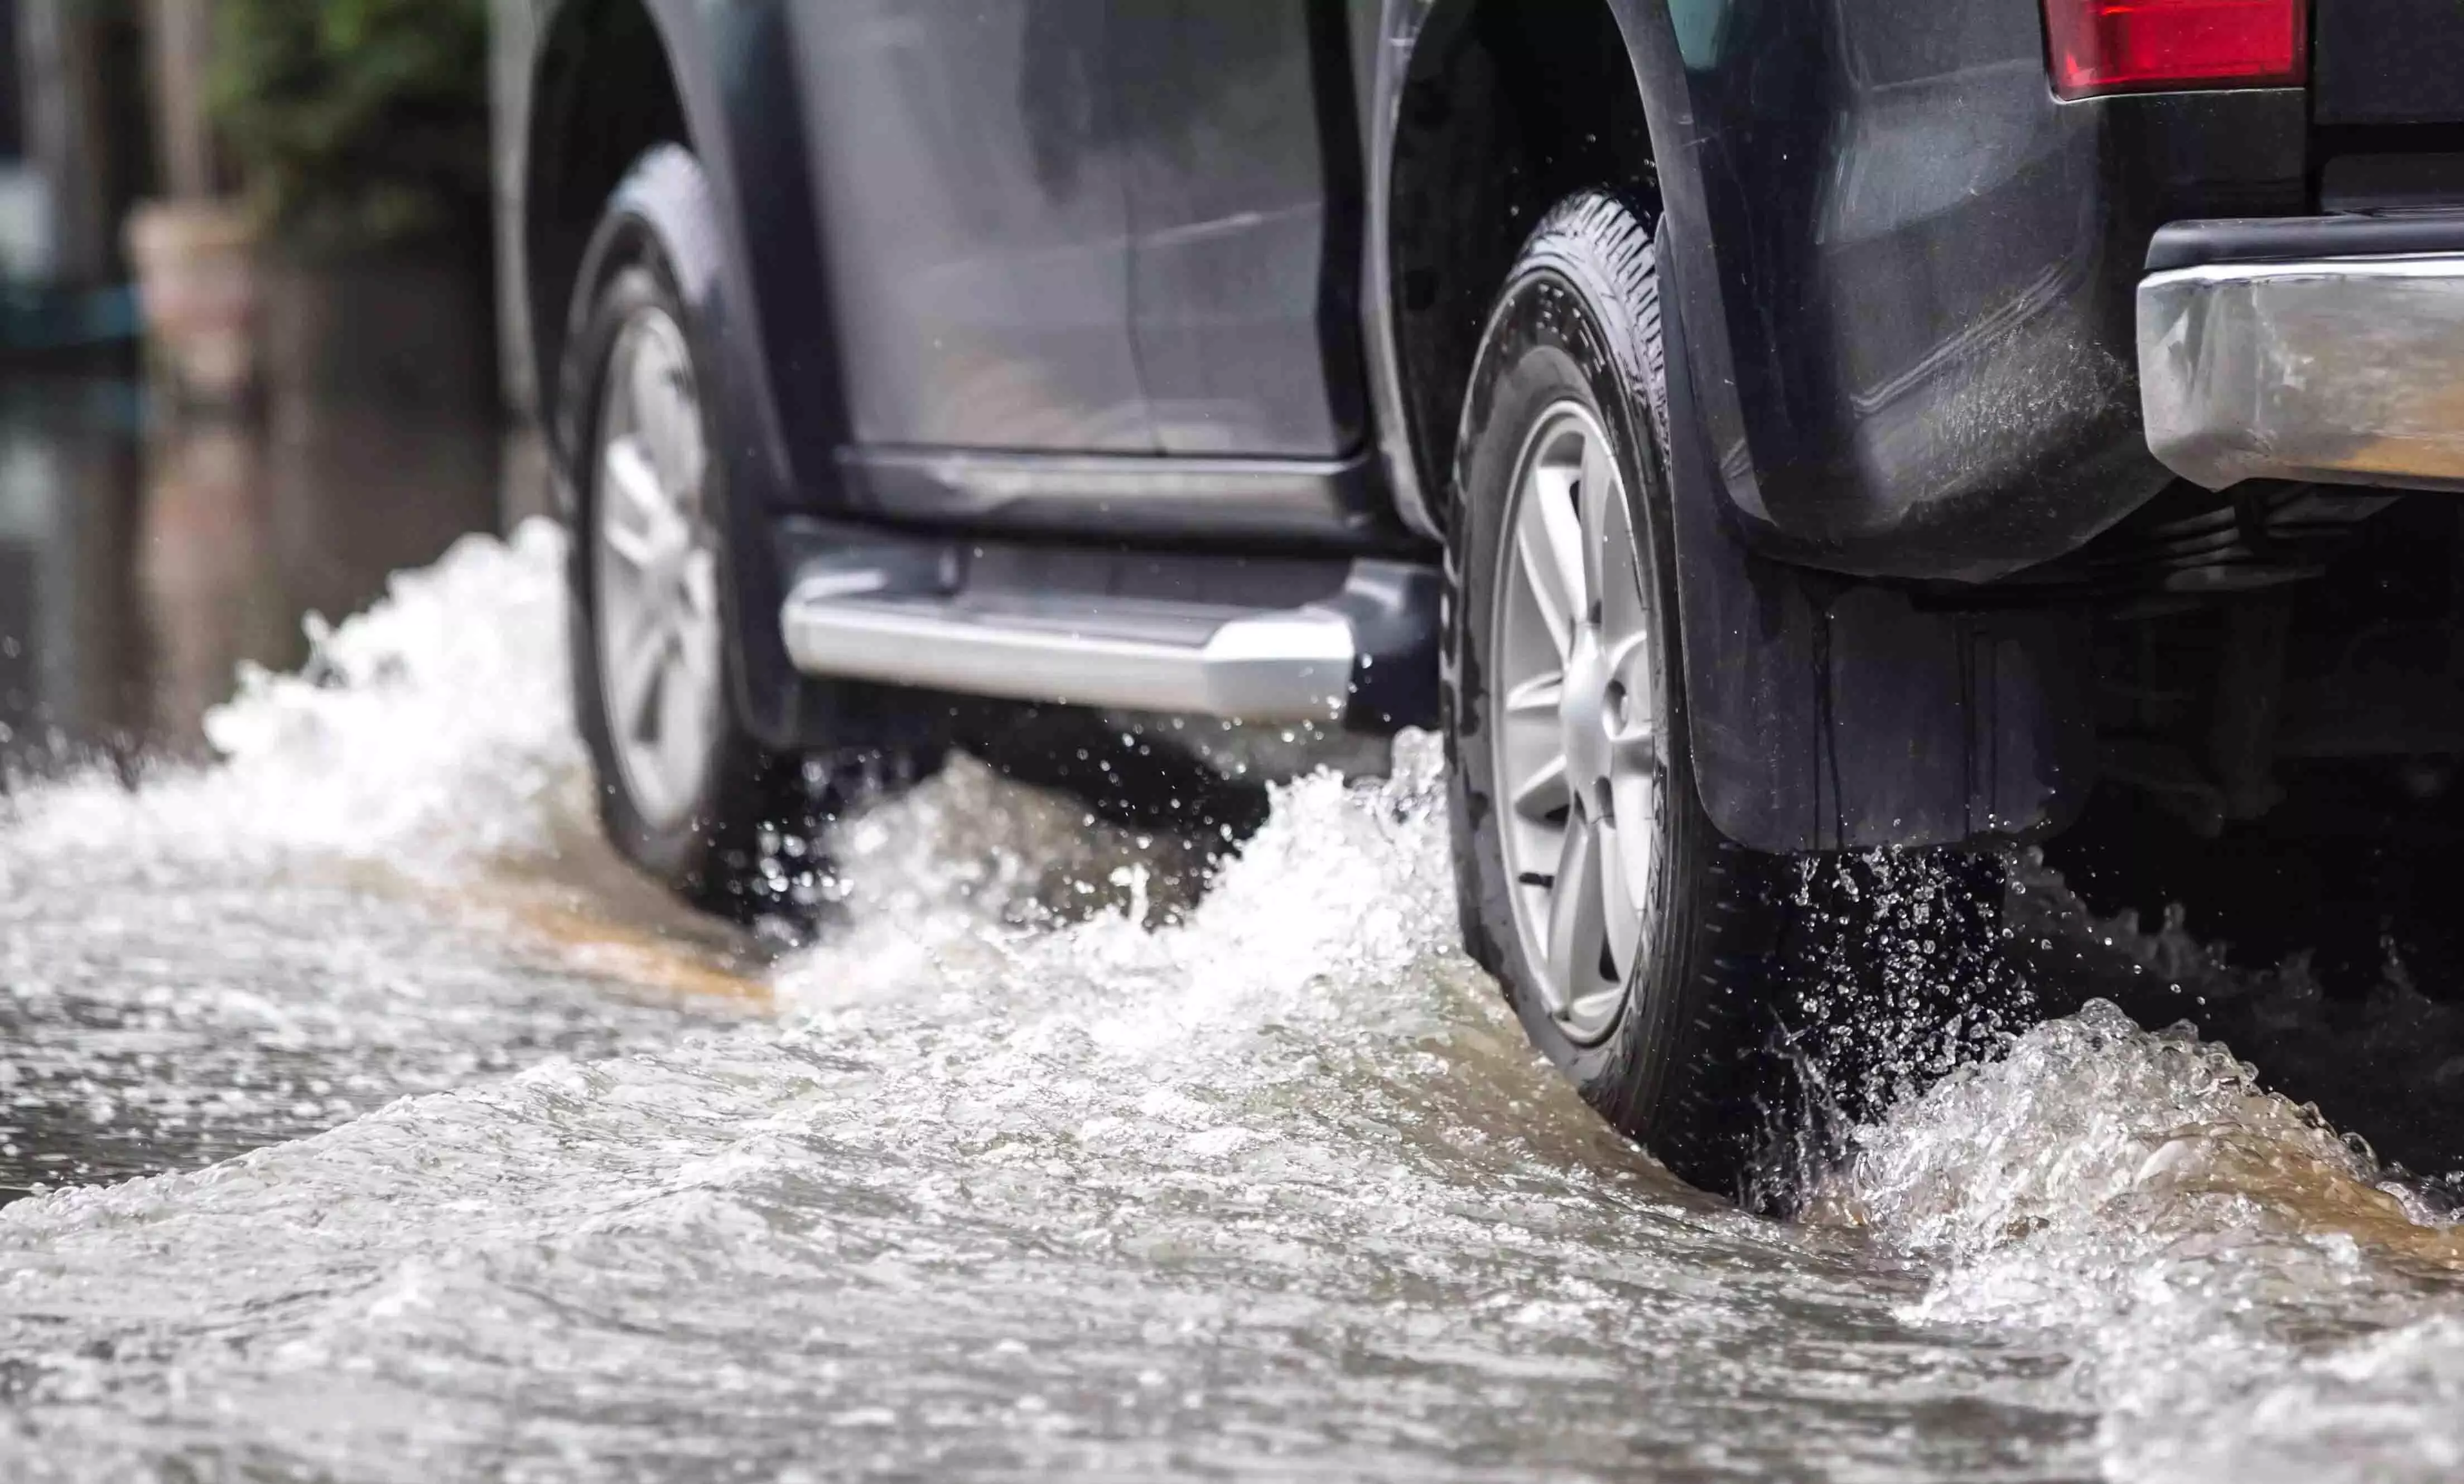 Hydroplaning What It Is & What To Do If Your Car Hyrdroplanes